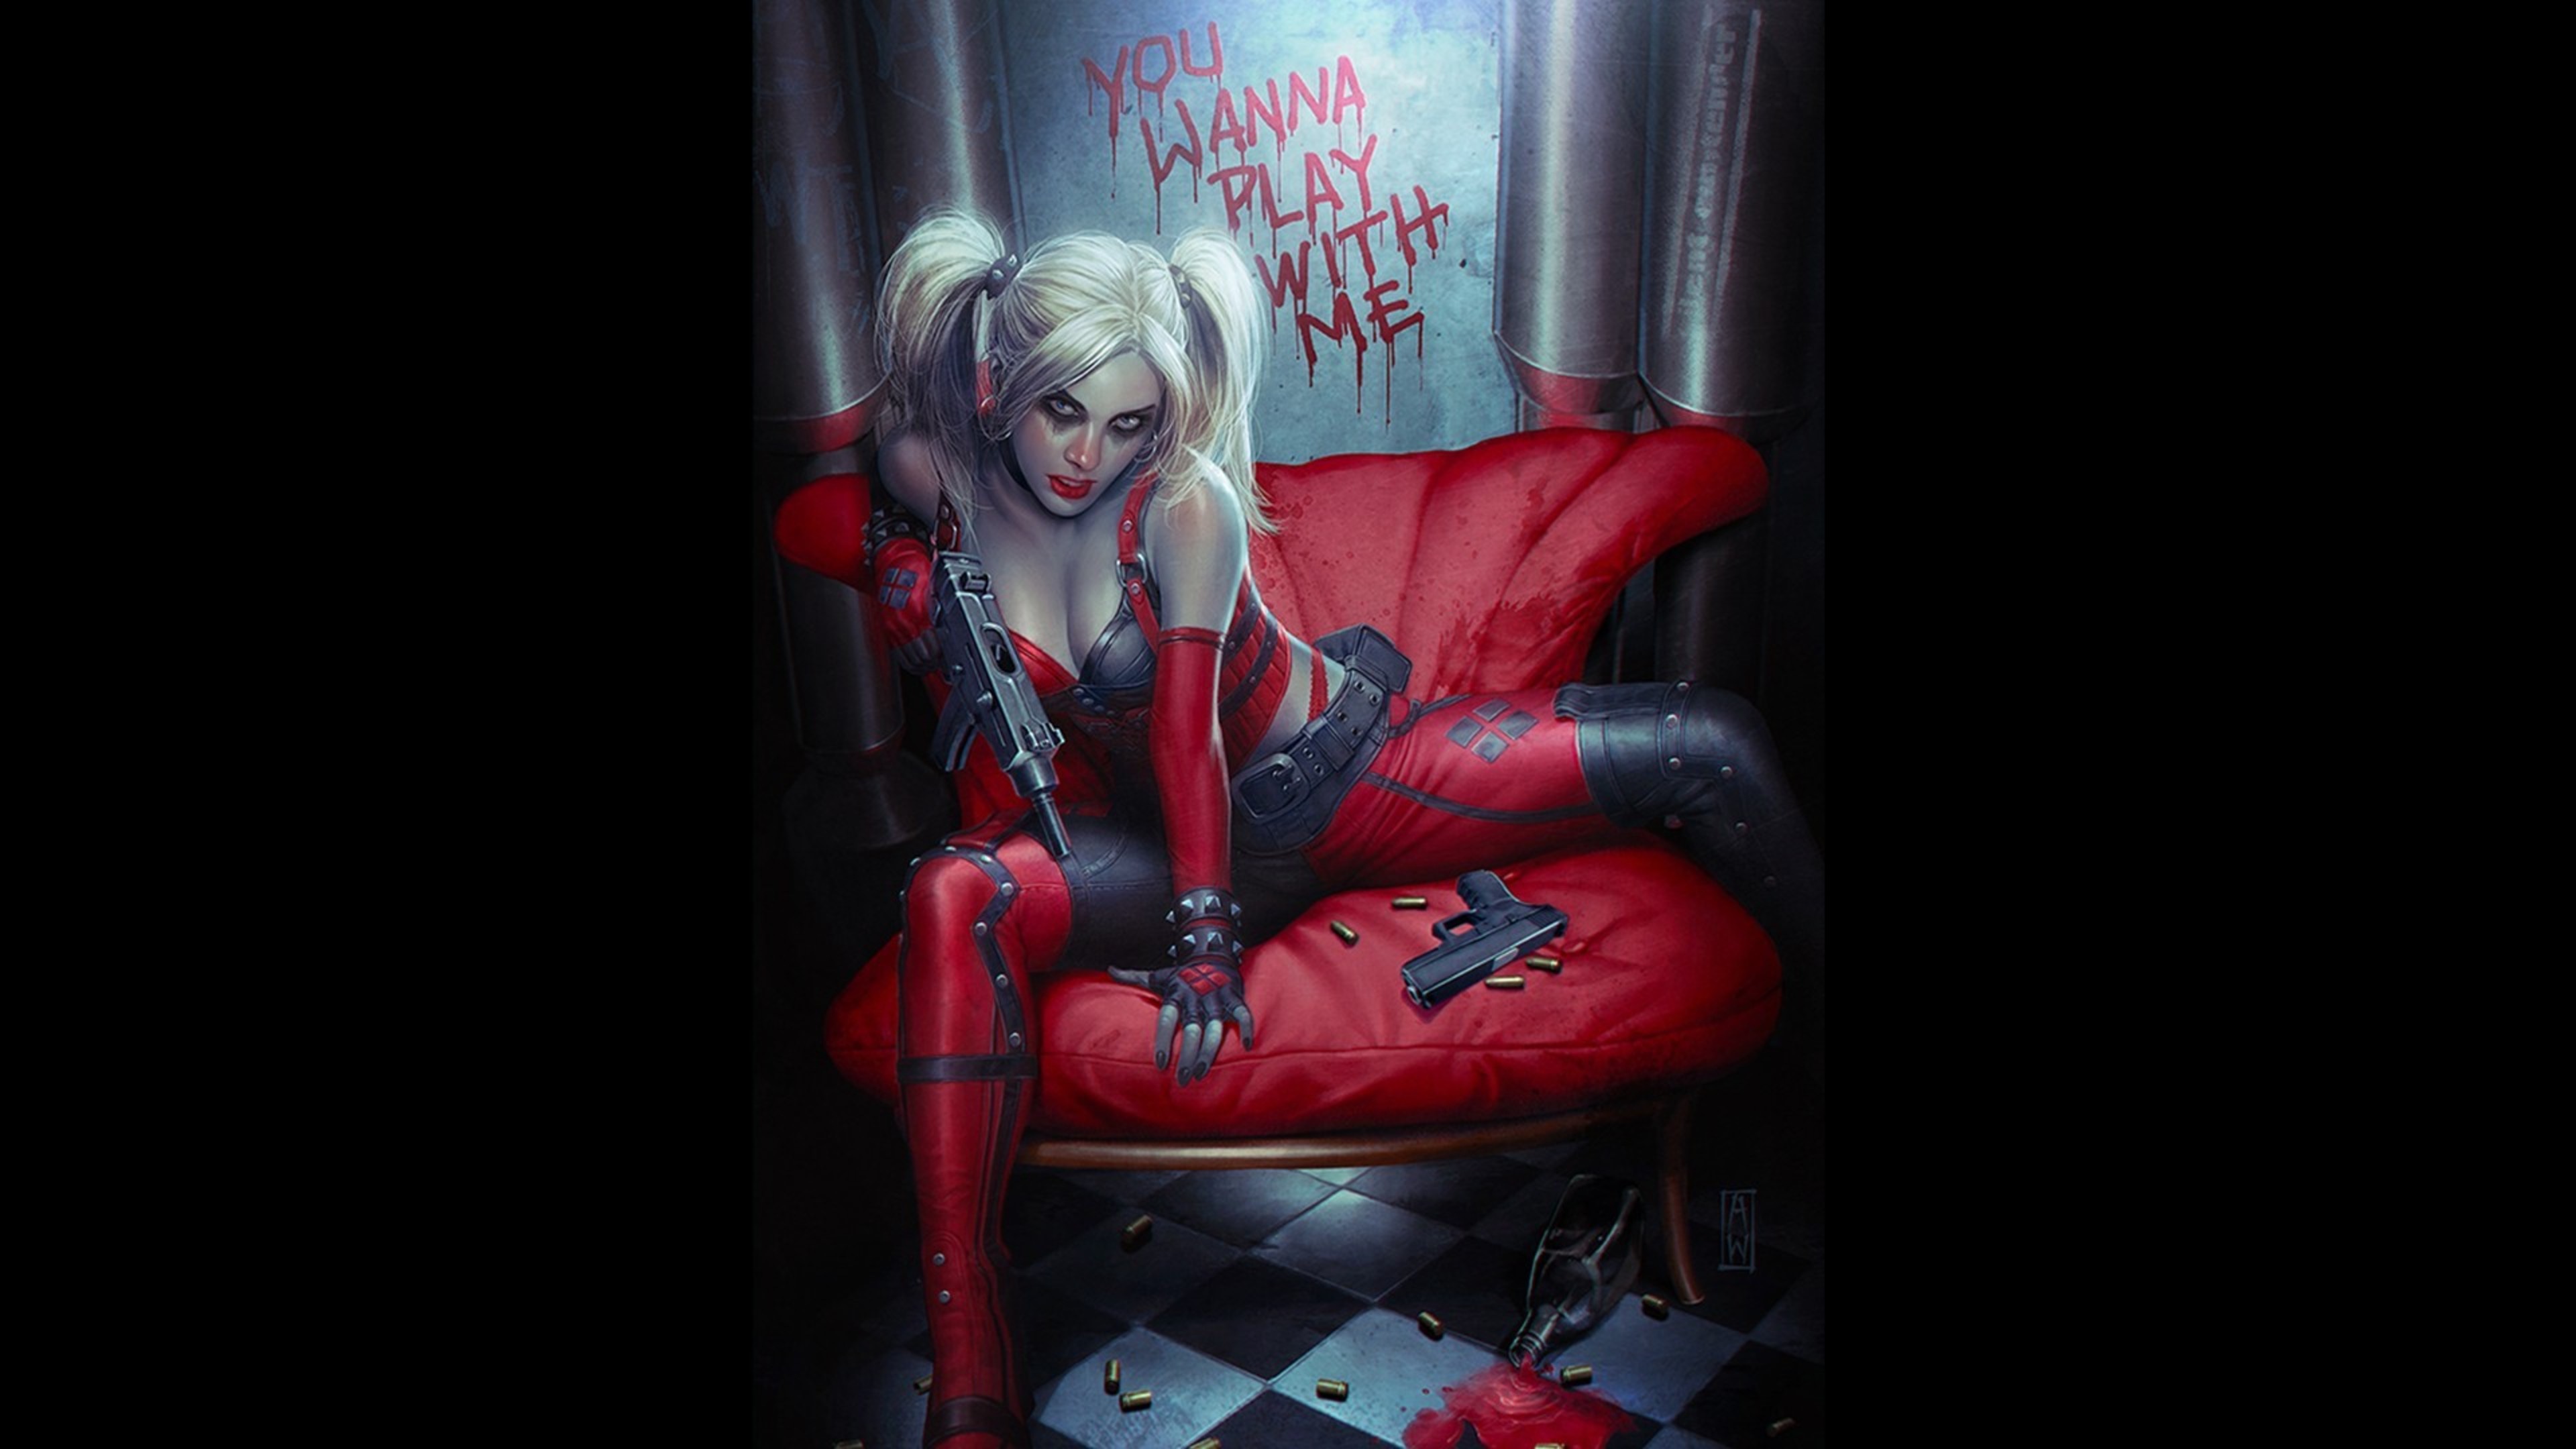 Harley Quinn For Apple Watch, Ipad, Iphone, And Mac - Harley Quinn Wallpaper Comic - HD Wallpaper 